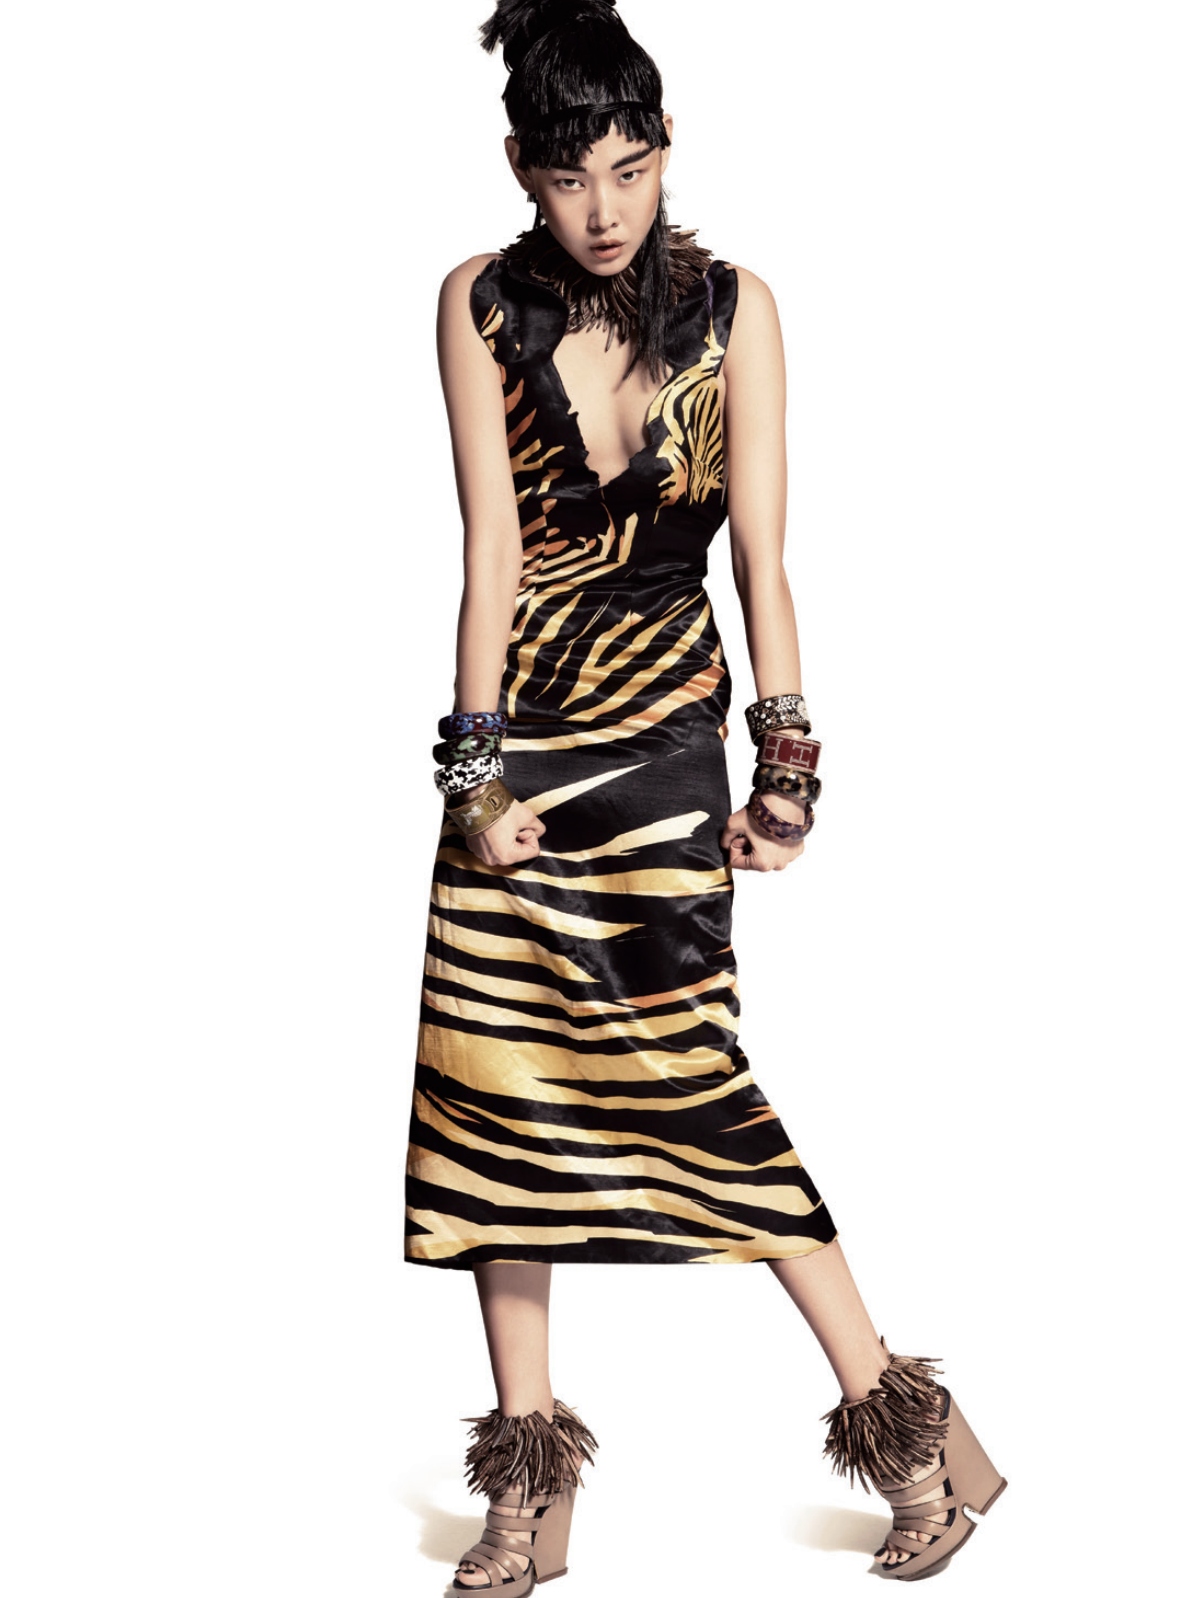 Editorial Tribal Chic